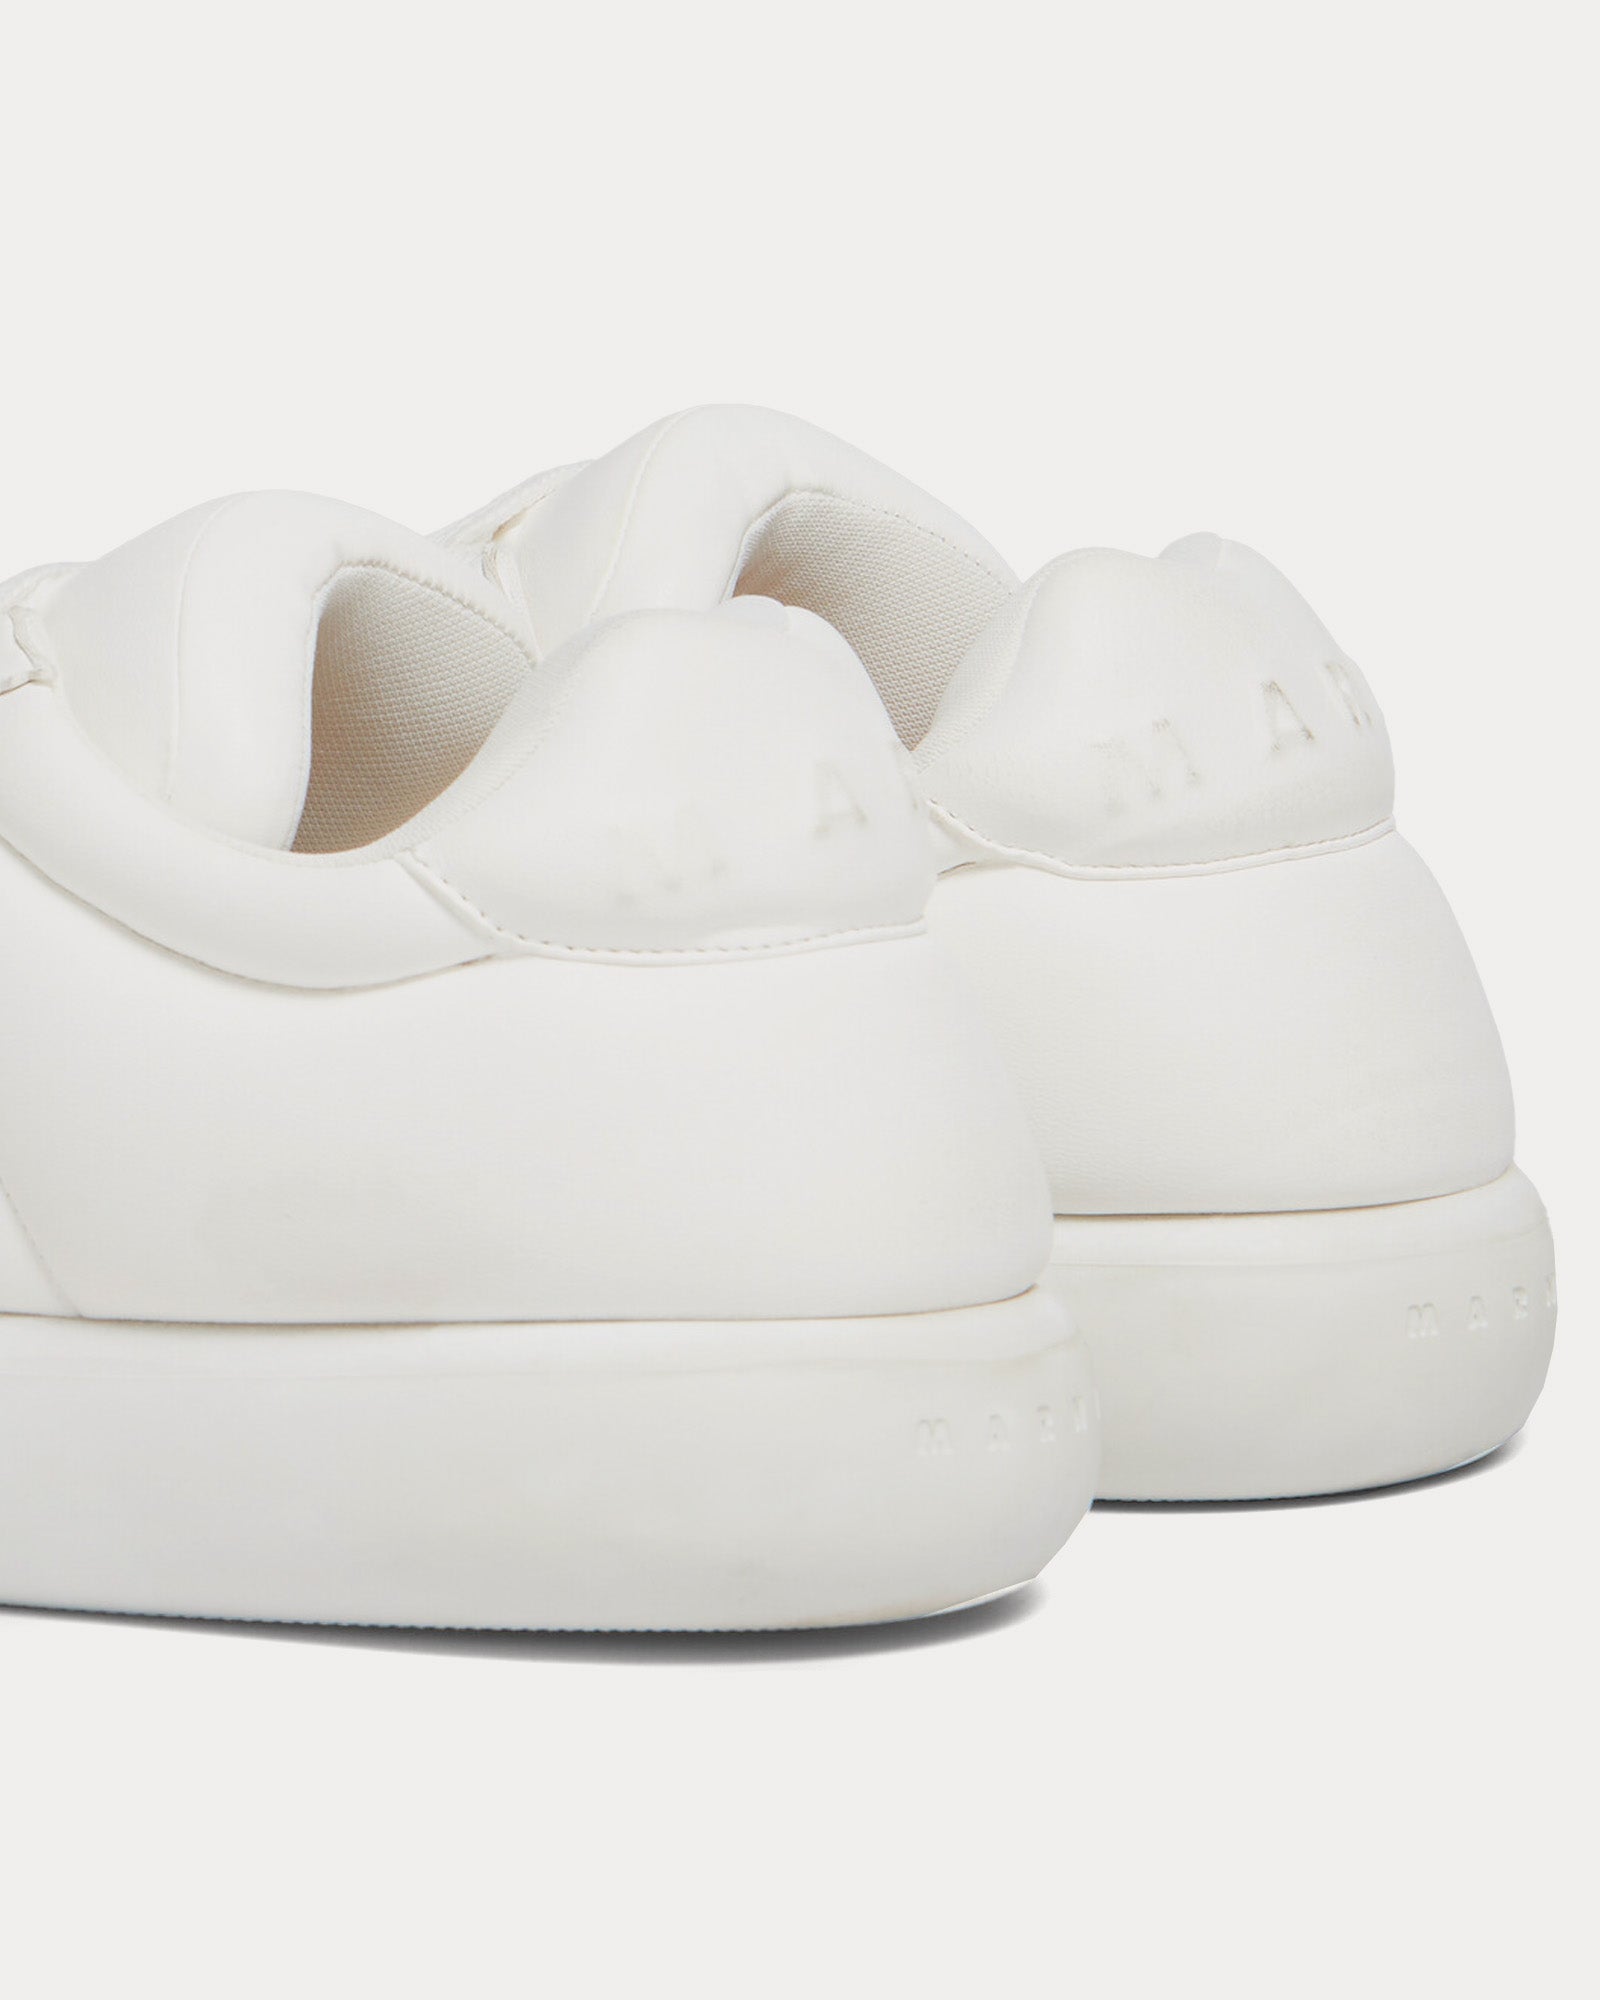 Marni - Bigfoot 2.0 Leather White Low Top Sneakers